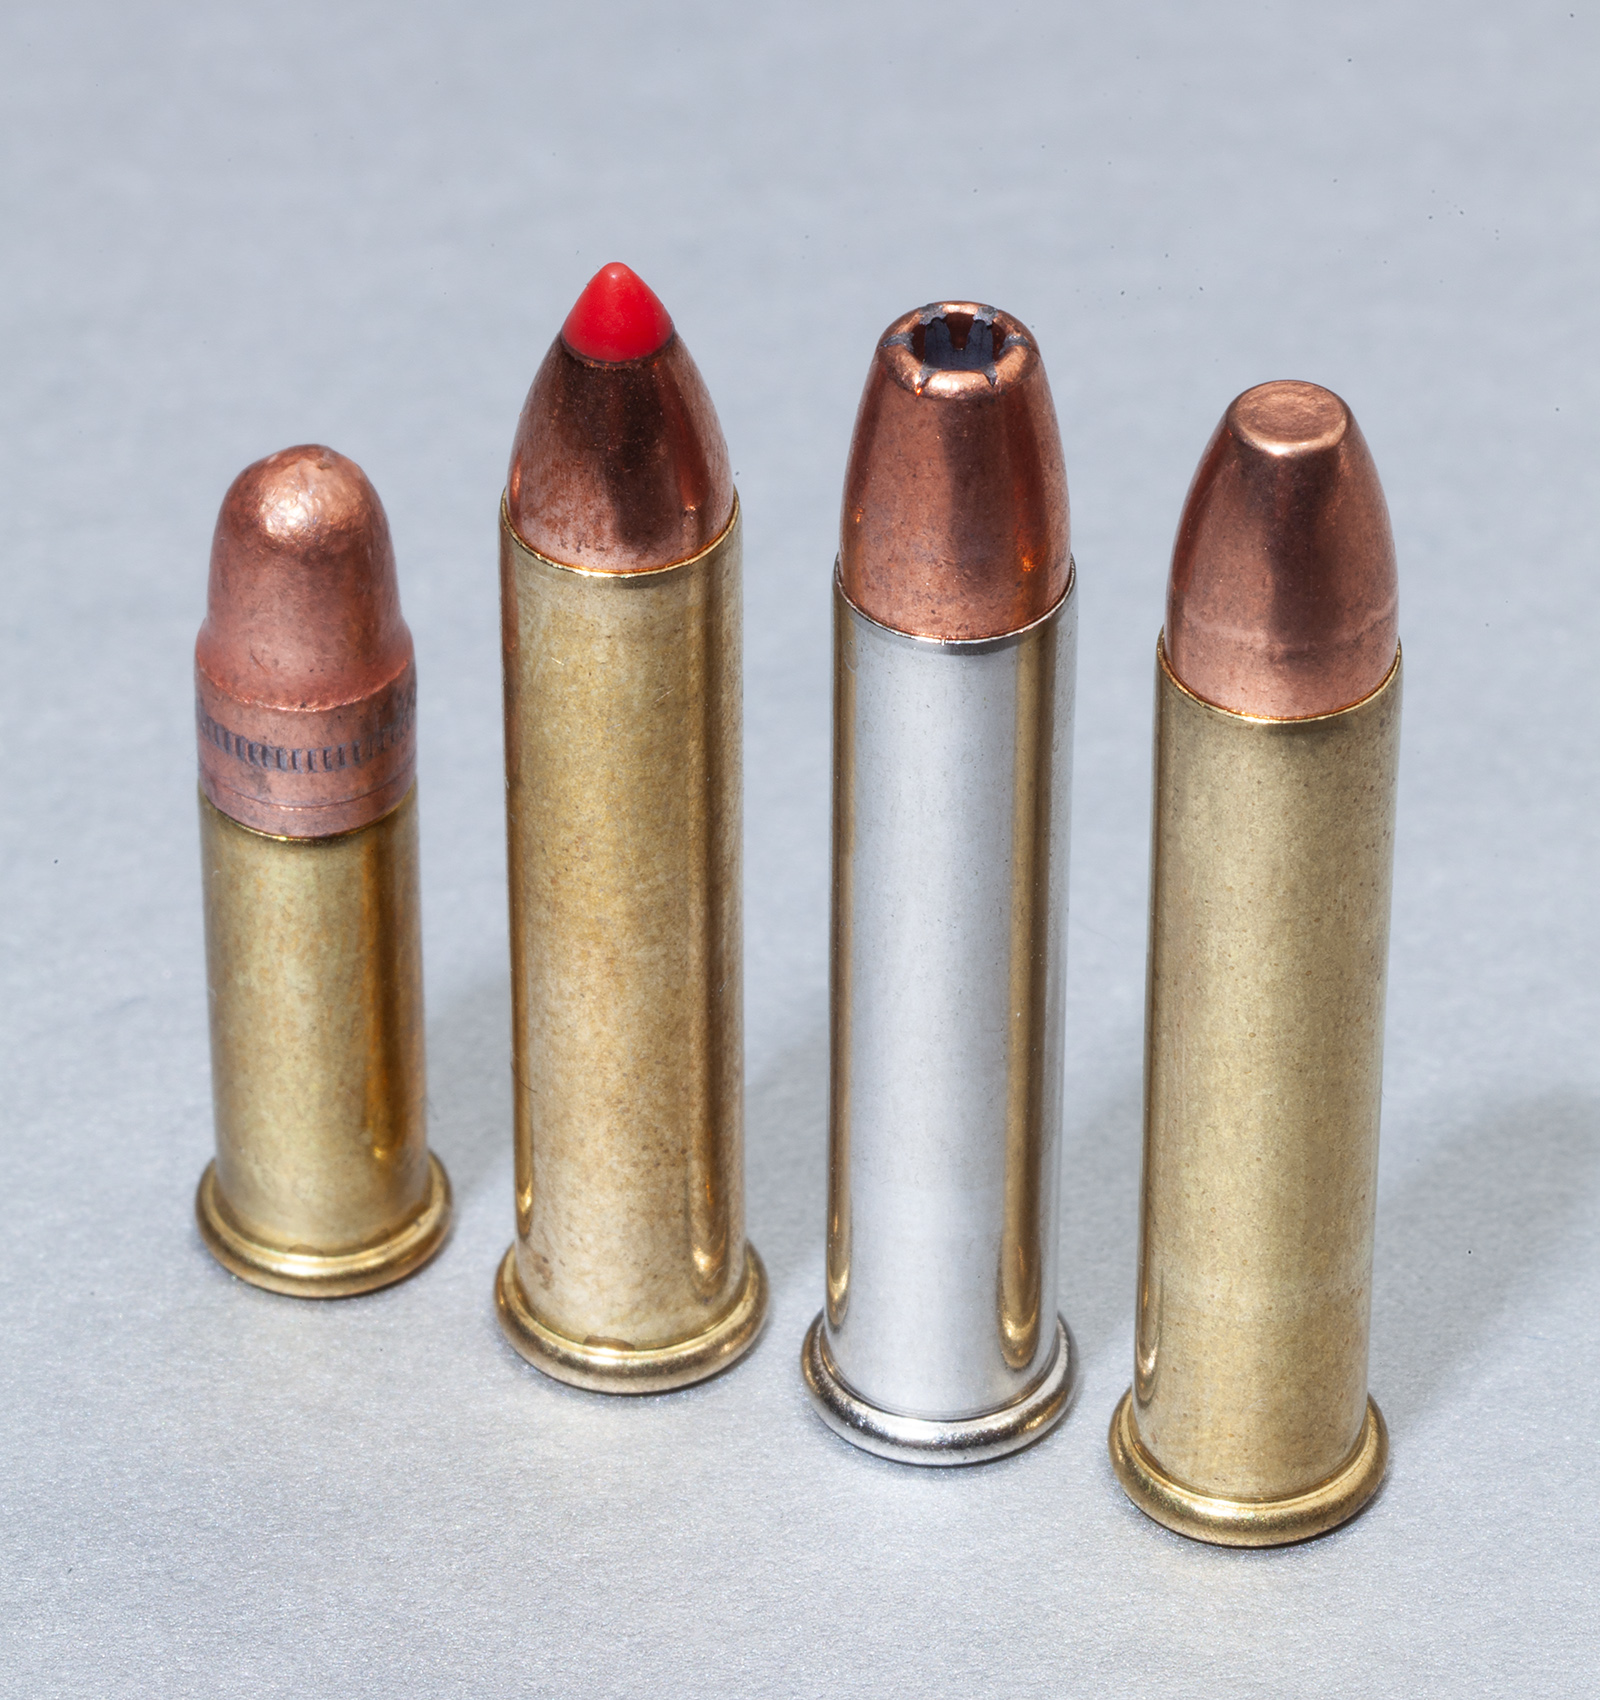 Top 3 Places to SELL your Range Brass for CASH or AMMUNITIONThe Firearm Blog